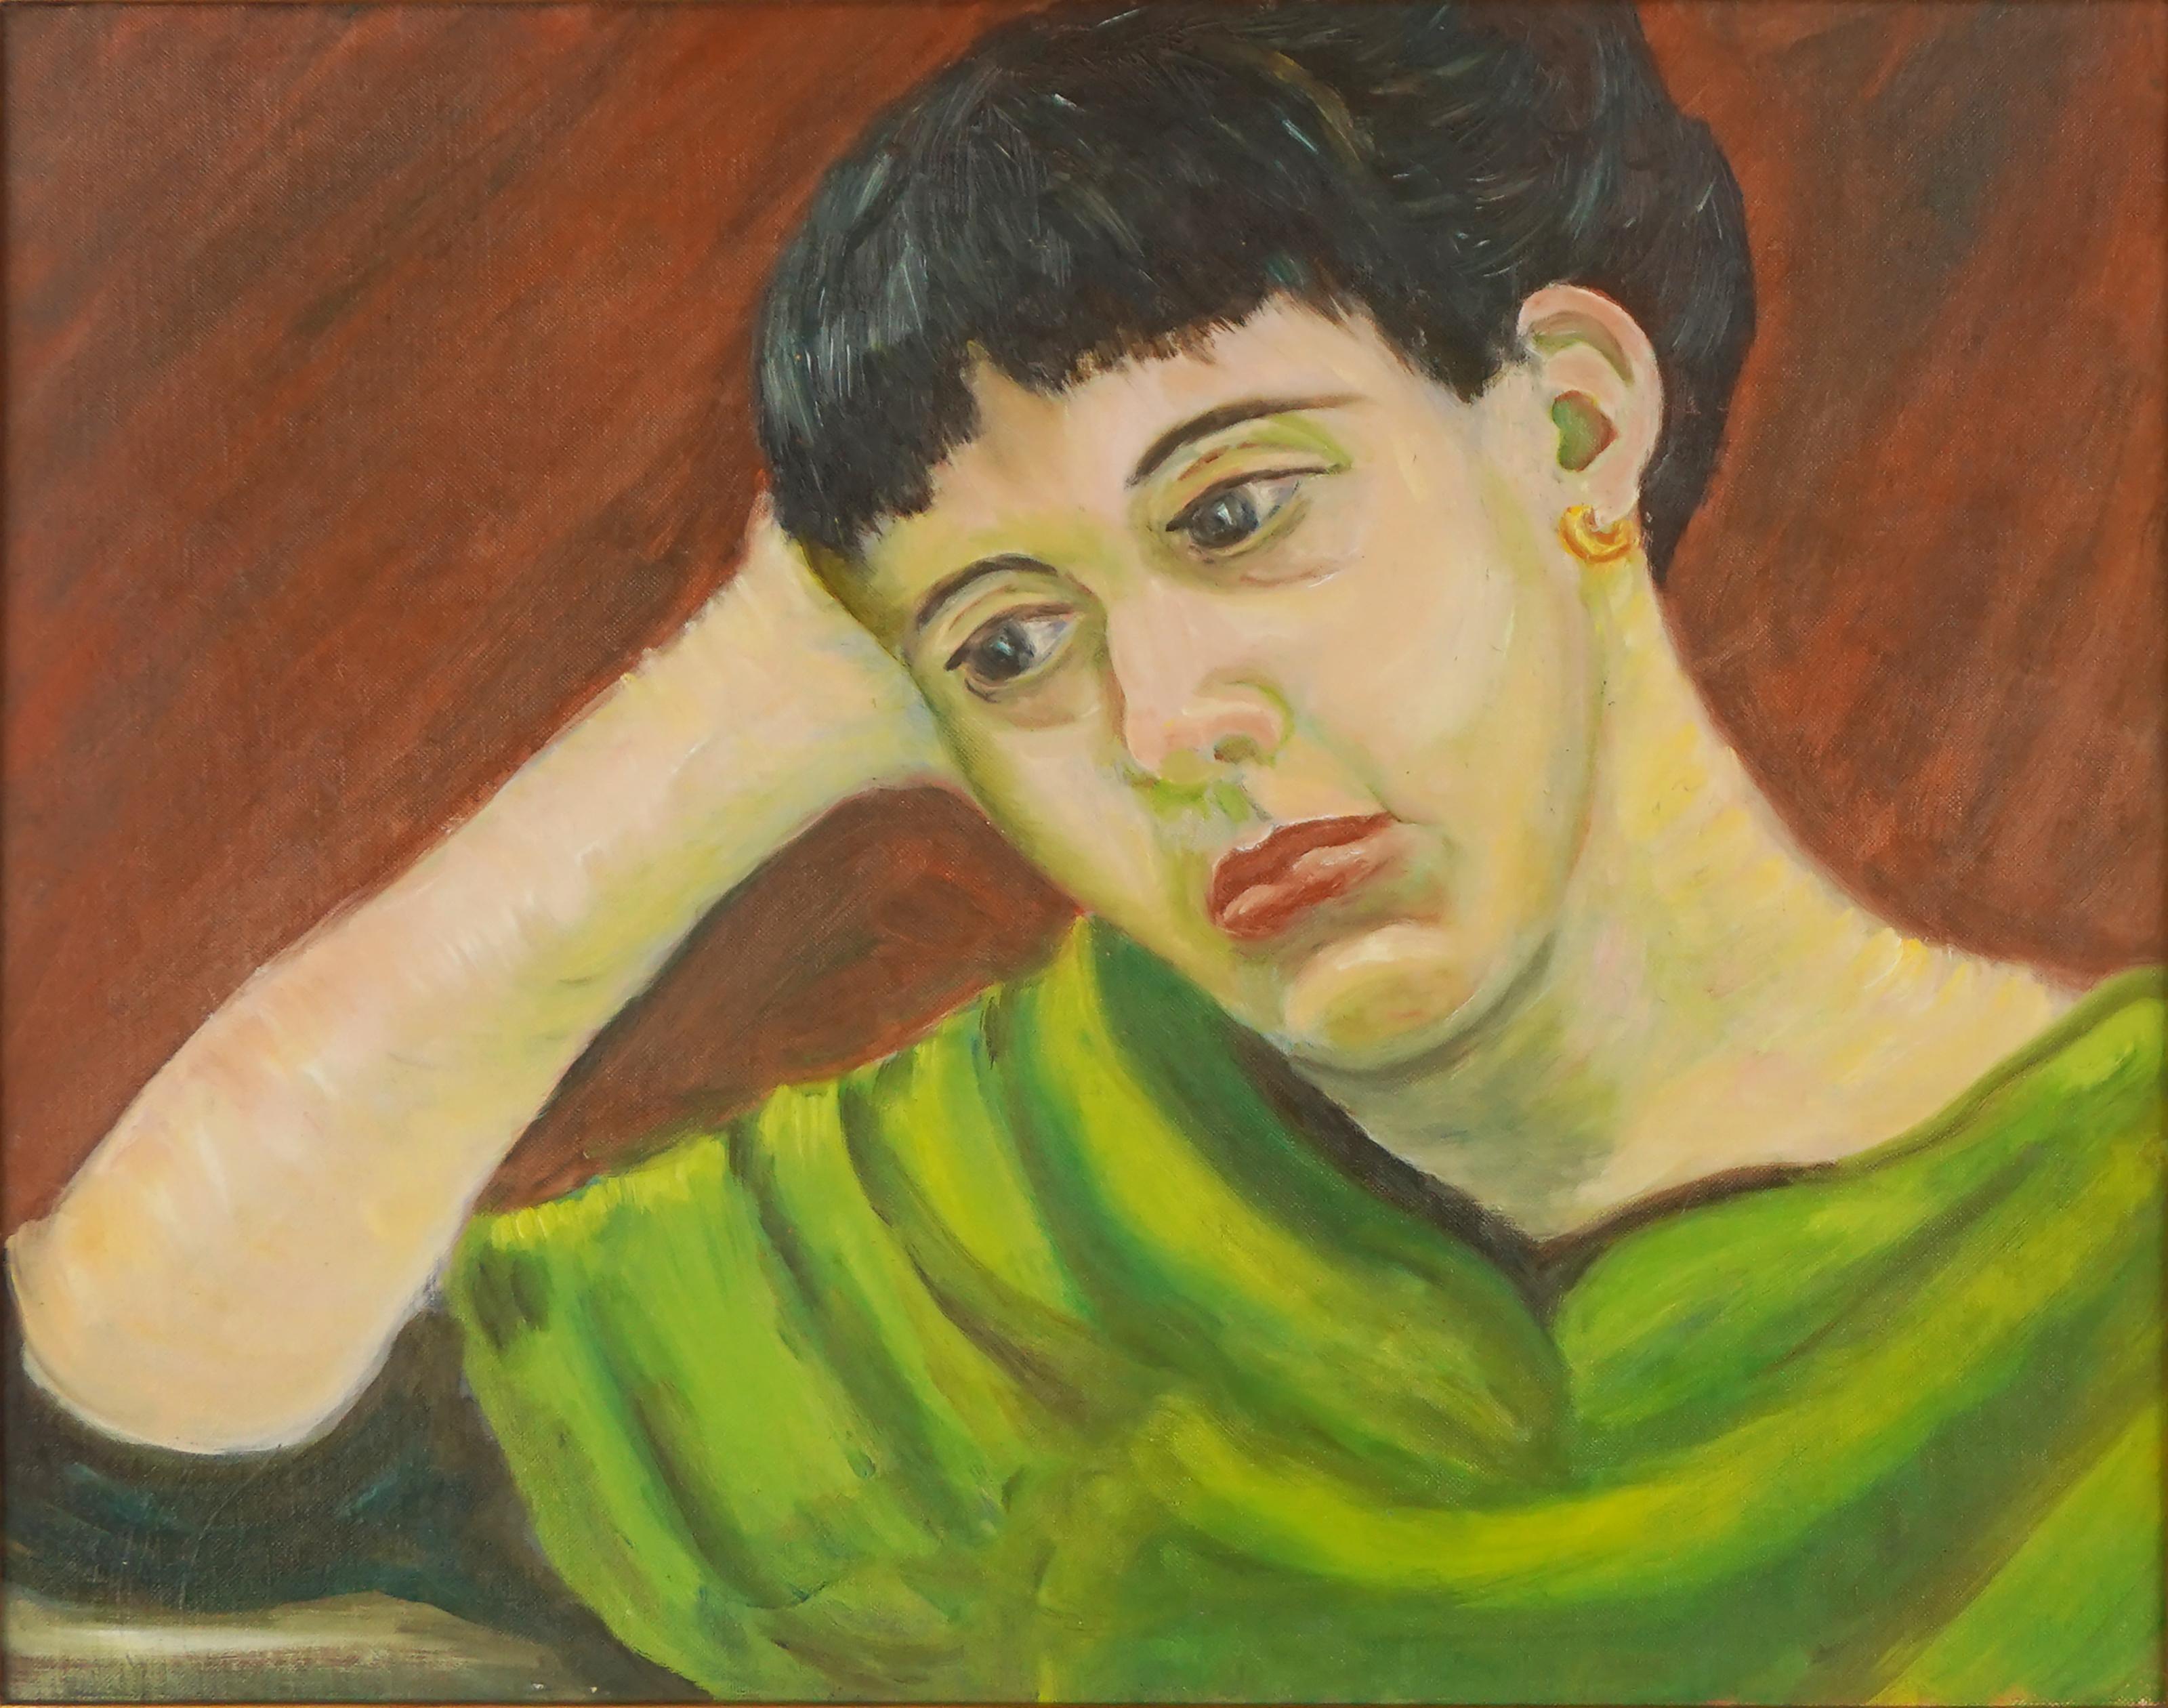 Mid Century Modern Portrait of Woman in Green Dress Original Oil Painting
Evocative mid century modern portrait of woman in green dress by California artist Genevieve Rogers (American, 1904 - 1984), circa 1960s. Pensive woman with pulled back dark